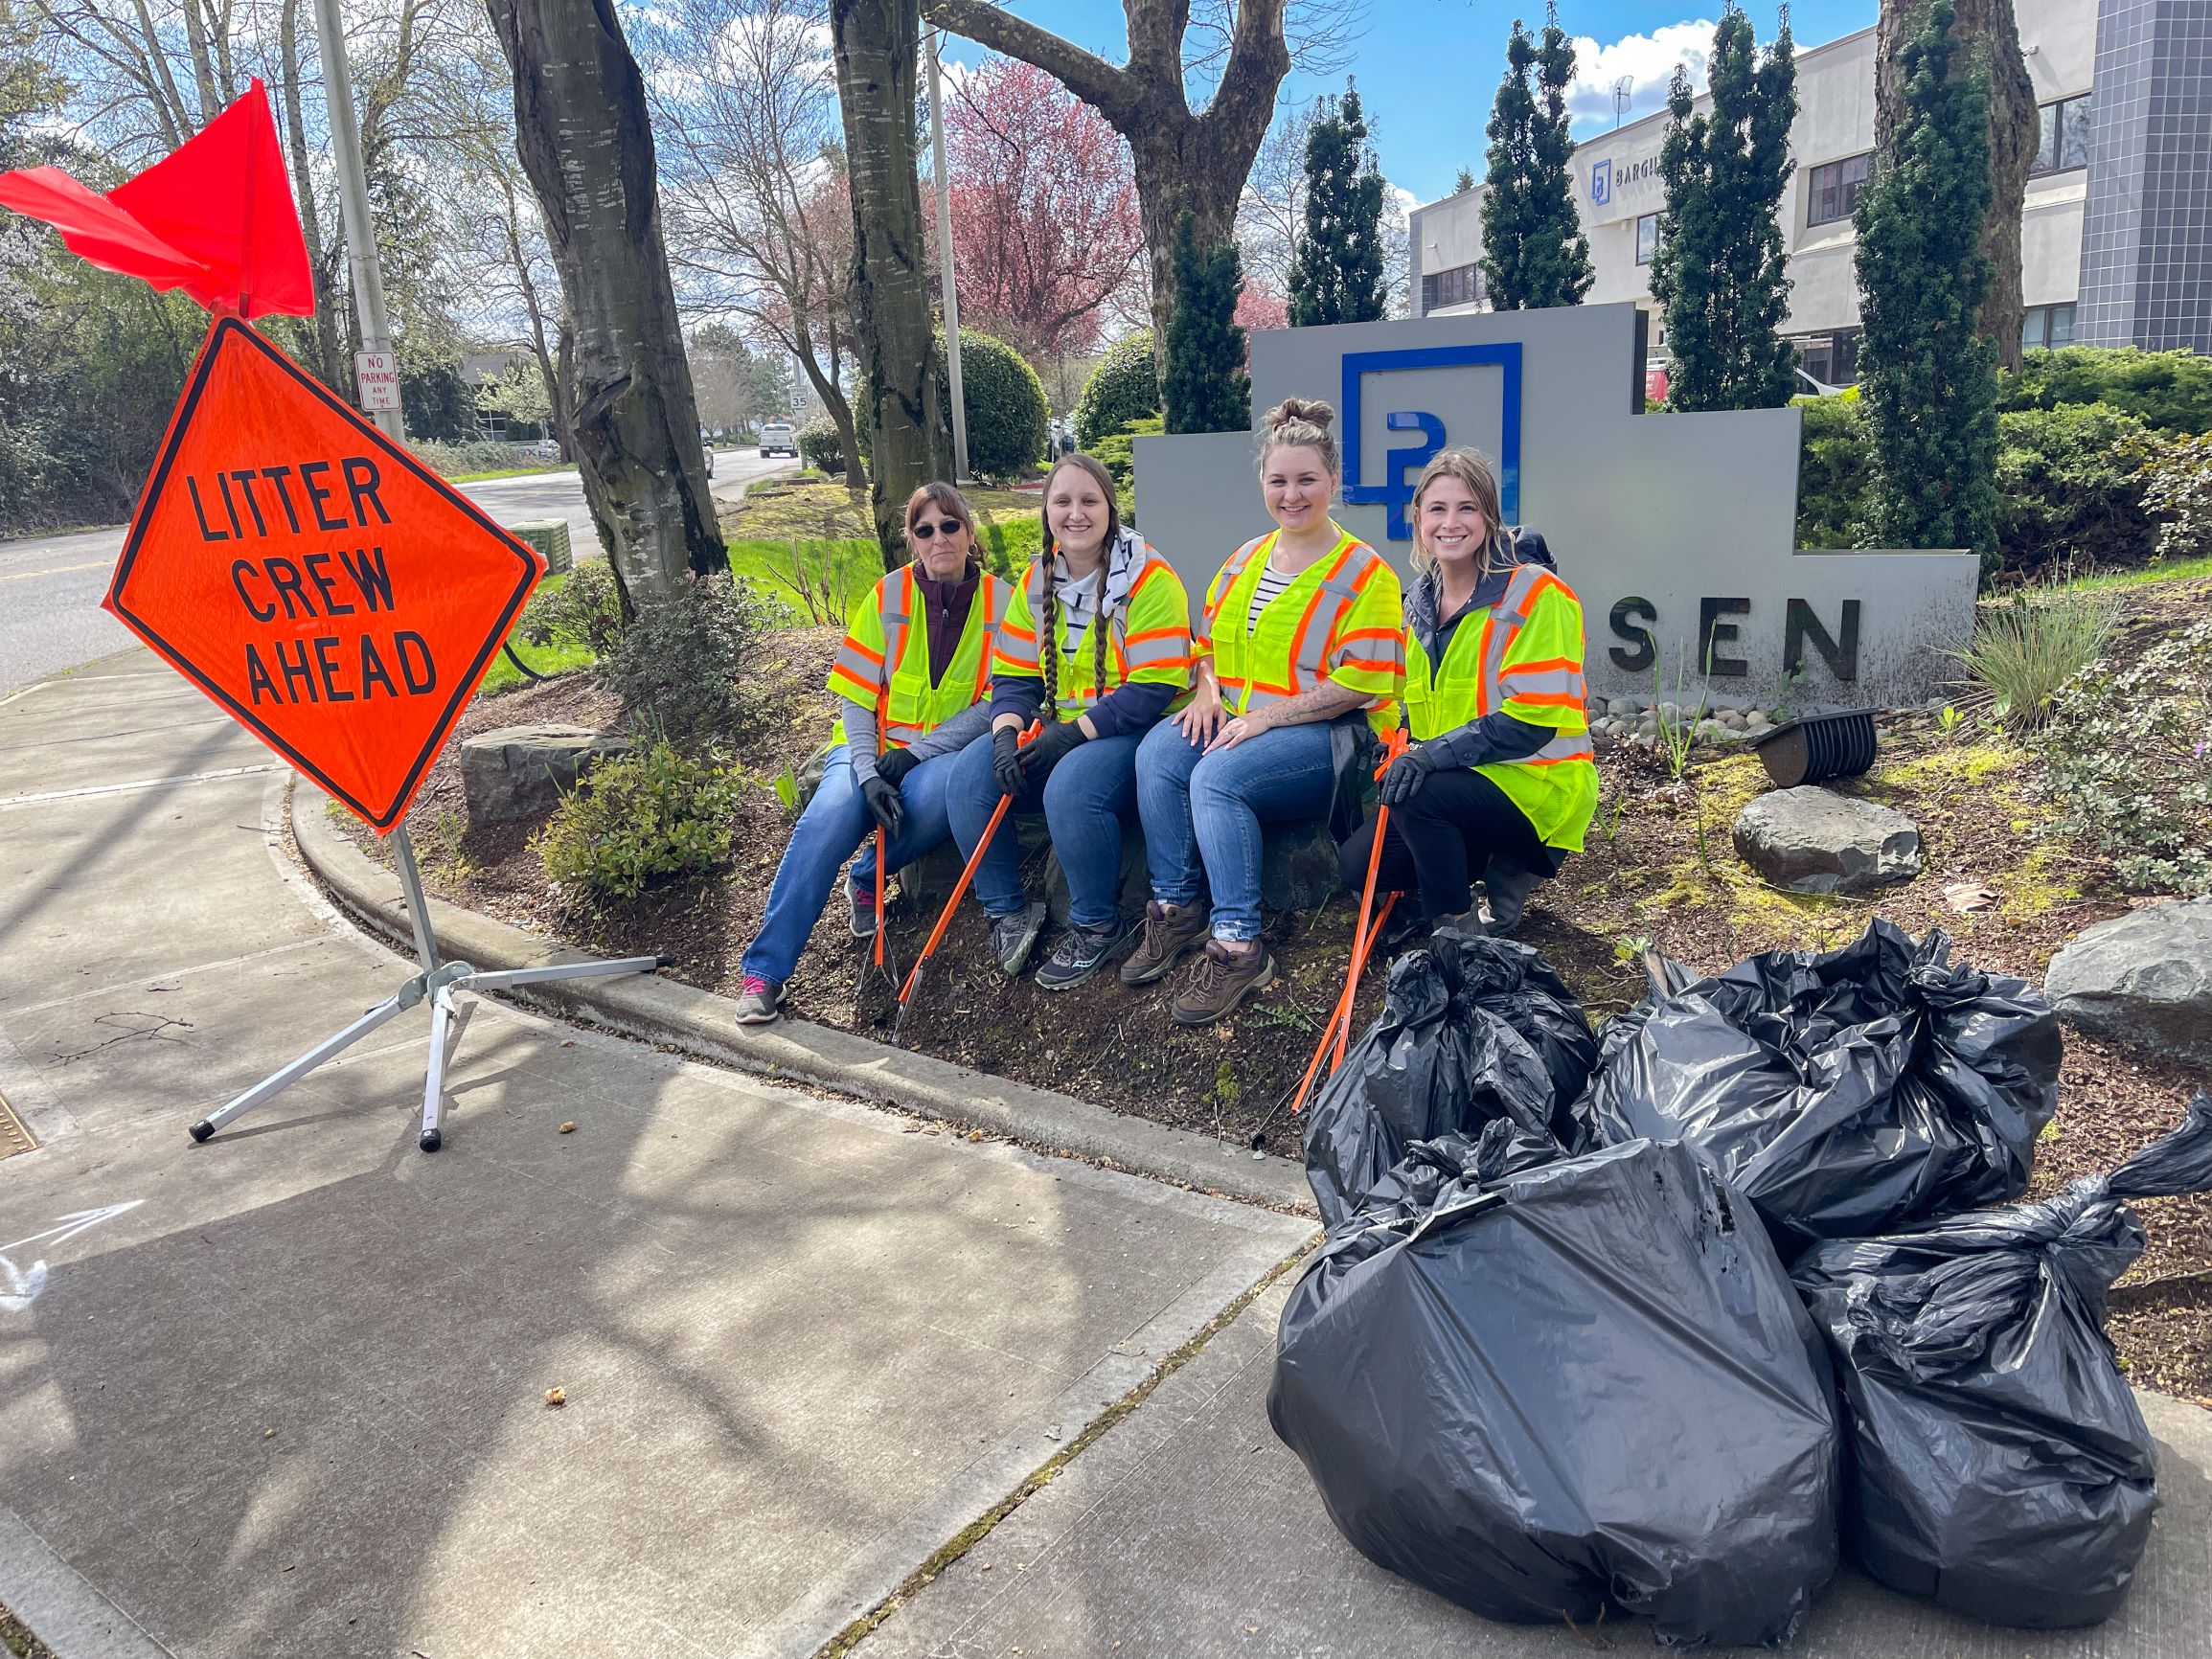 Four Barghausen employees sit in front of the Barghausen sign, volunteering to pick up litter